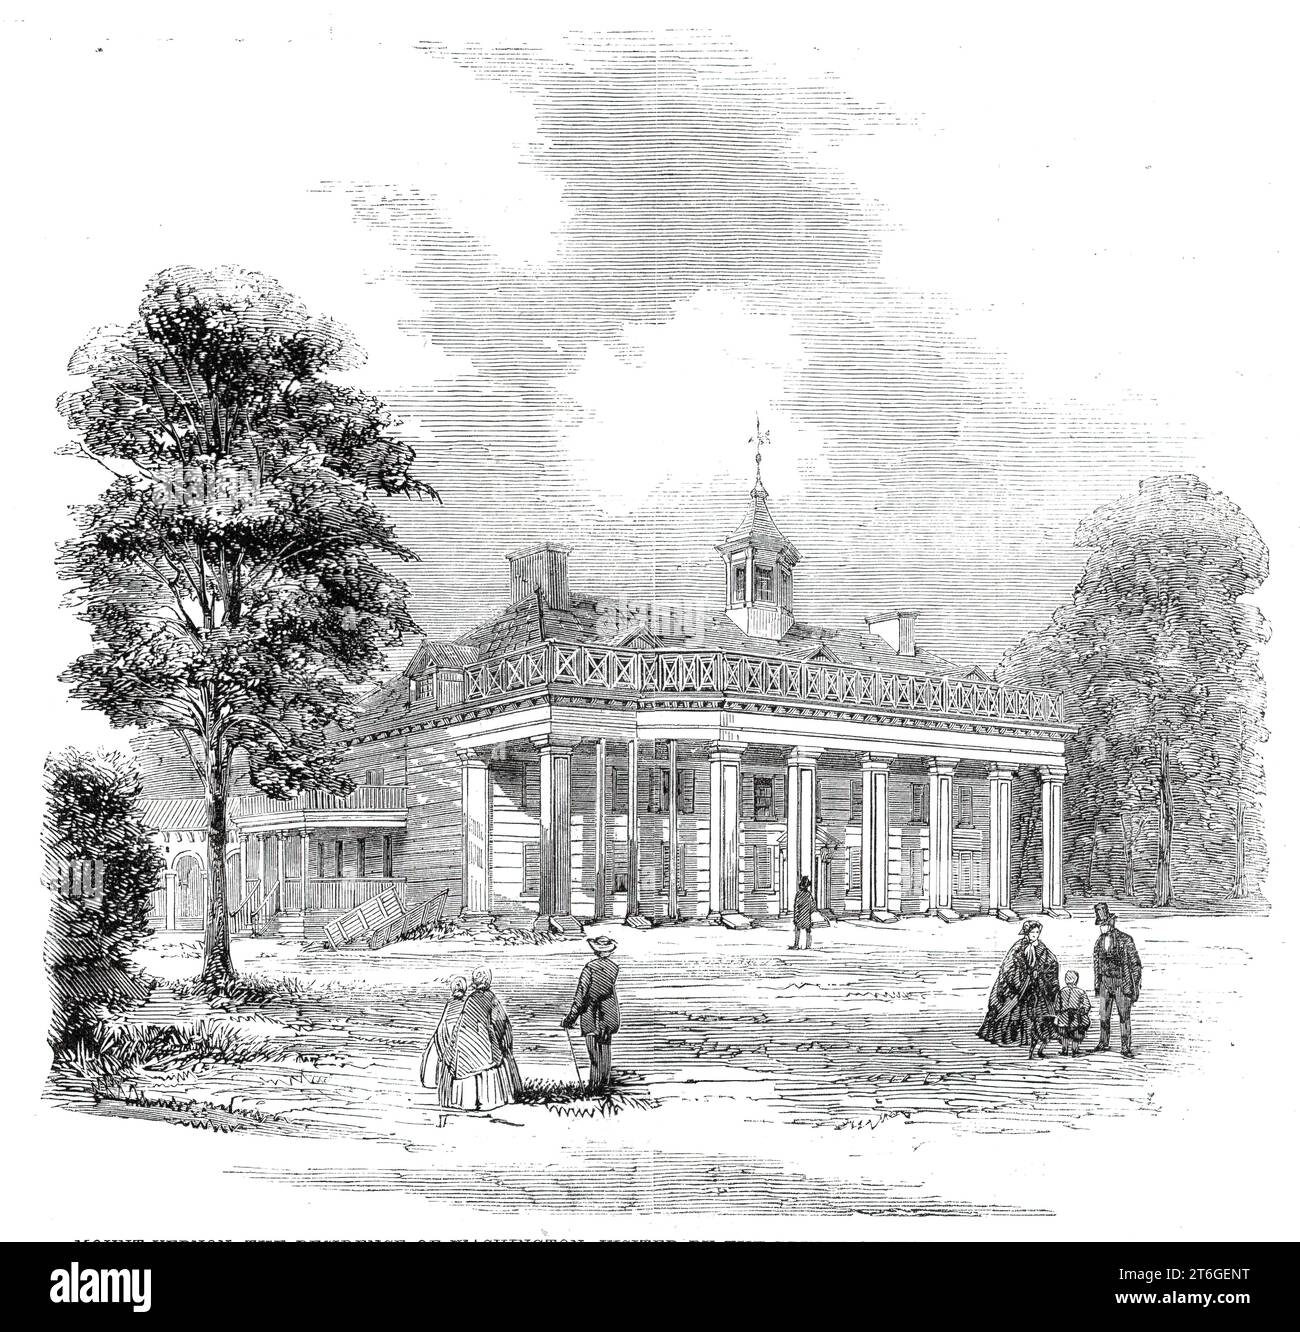 Mount Vernon, the residence of Washington, visited by the Prince of Wales on the 5th of October, 1860. The house ' ...is, according to the Times' correspondent, in shocking plight, and fast going to ruin...In the centre of the lawn is a long, straggling, oldfashioned, wooden country-house, three stories high, with very tall, square wooden pillars, supporting a broad balcony, which shades the whole front...Above the balcony, with its wooden lattice balustrade, ruined and broken like torn lace, is a sloping irregular tiled roof, green with the moss and damp of many years. Four pointed little gab Stock Photo